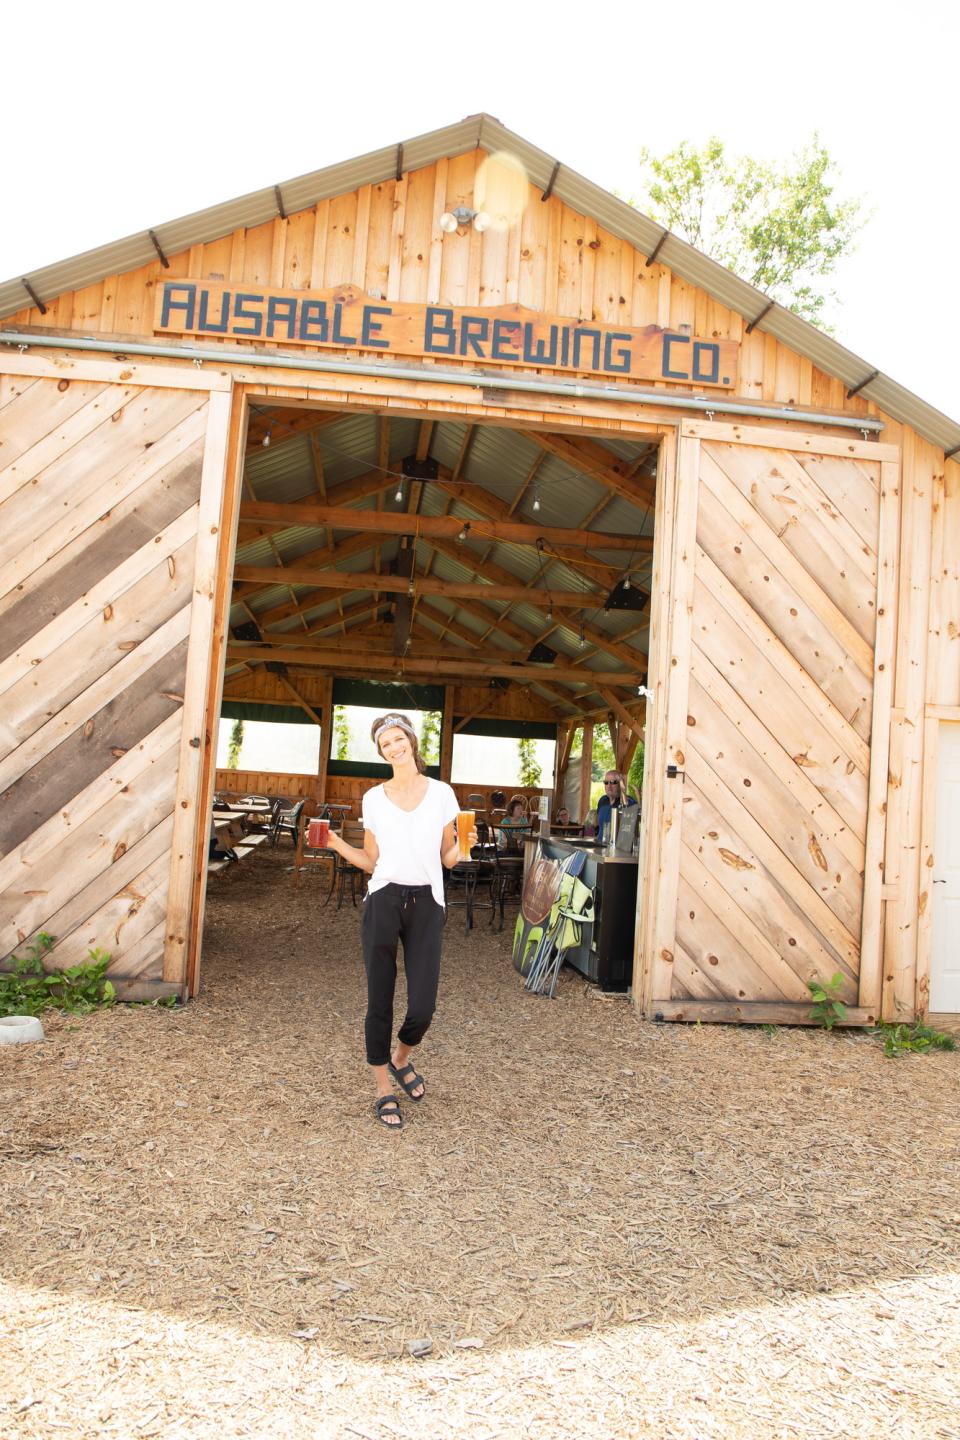 A waitress emerges from a brewery built in a barn on a sunny day.